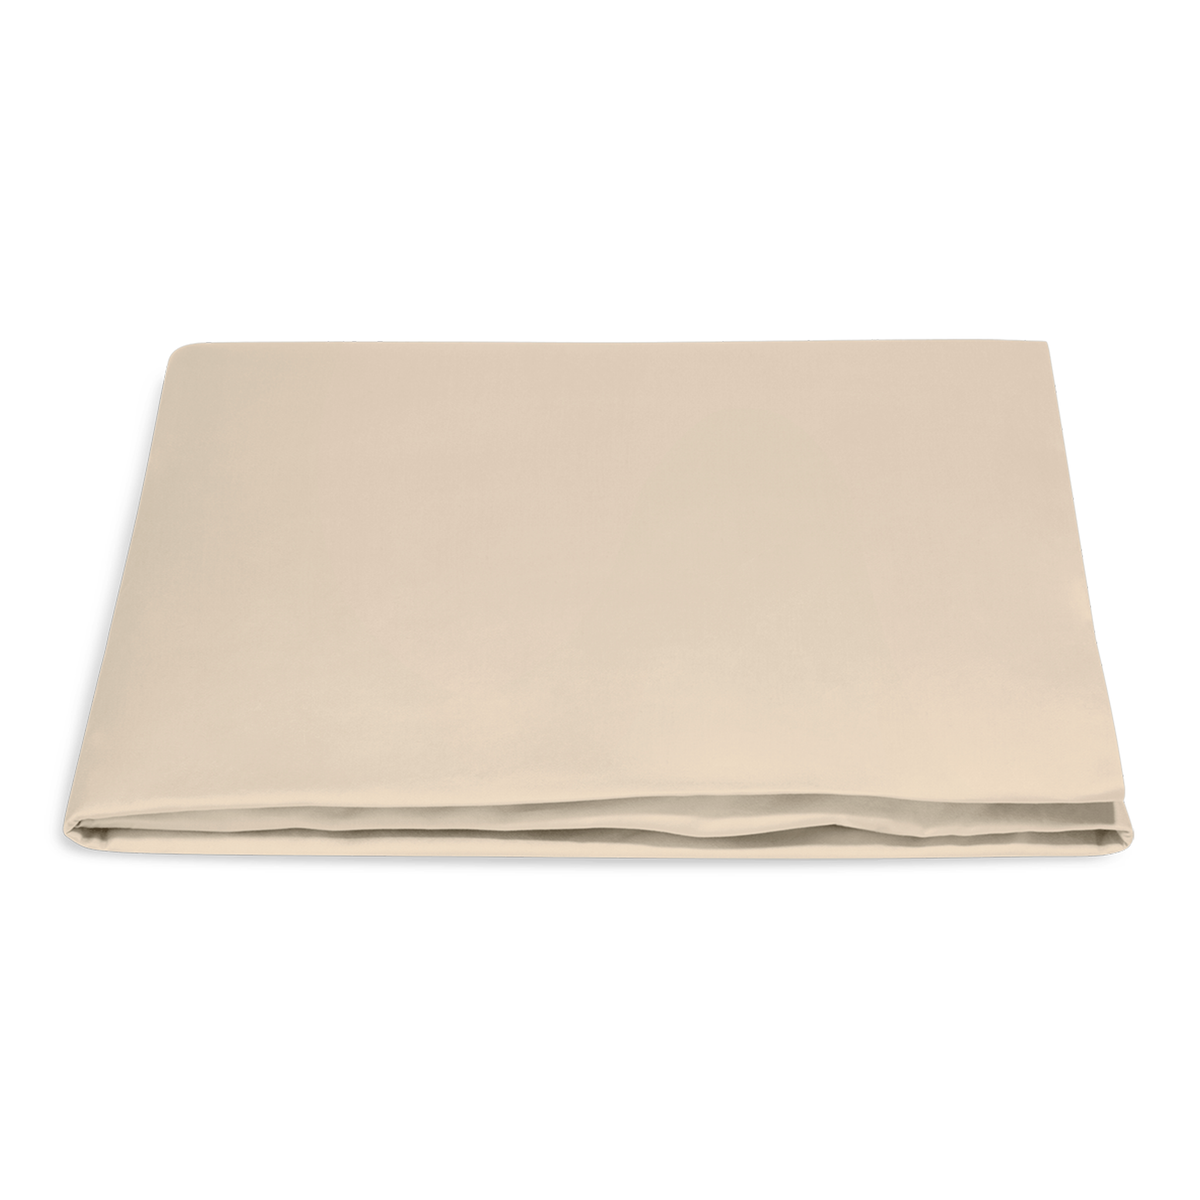 Folded Fitted Sheet of Matouk Nocturne Bedding Collection in Color Dune